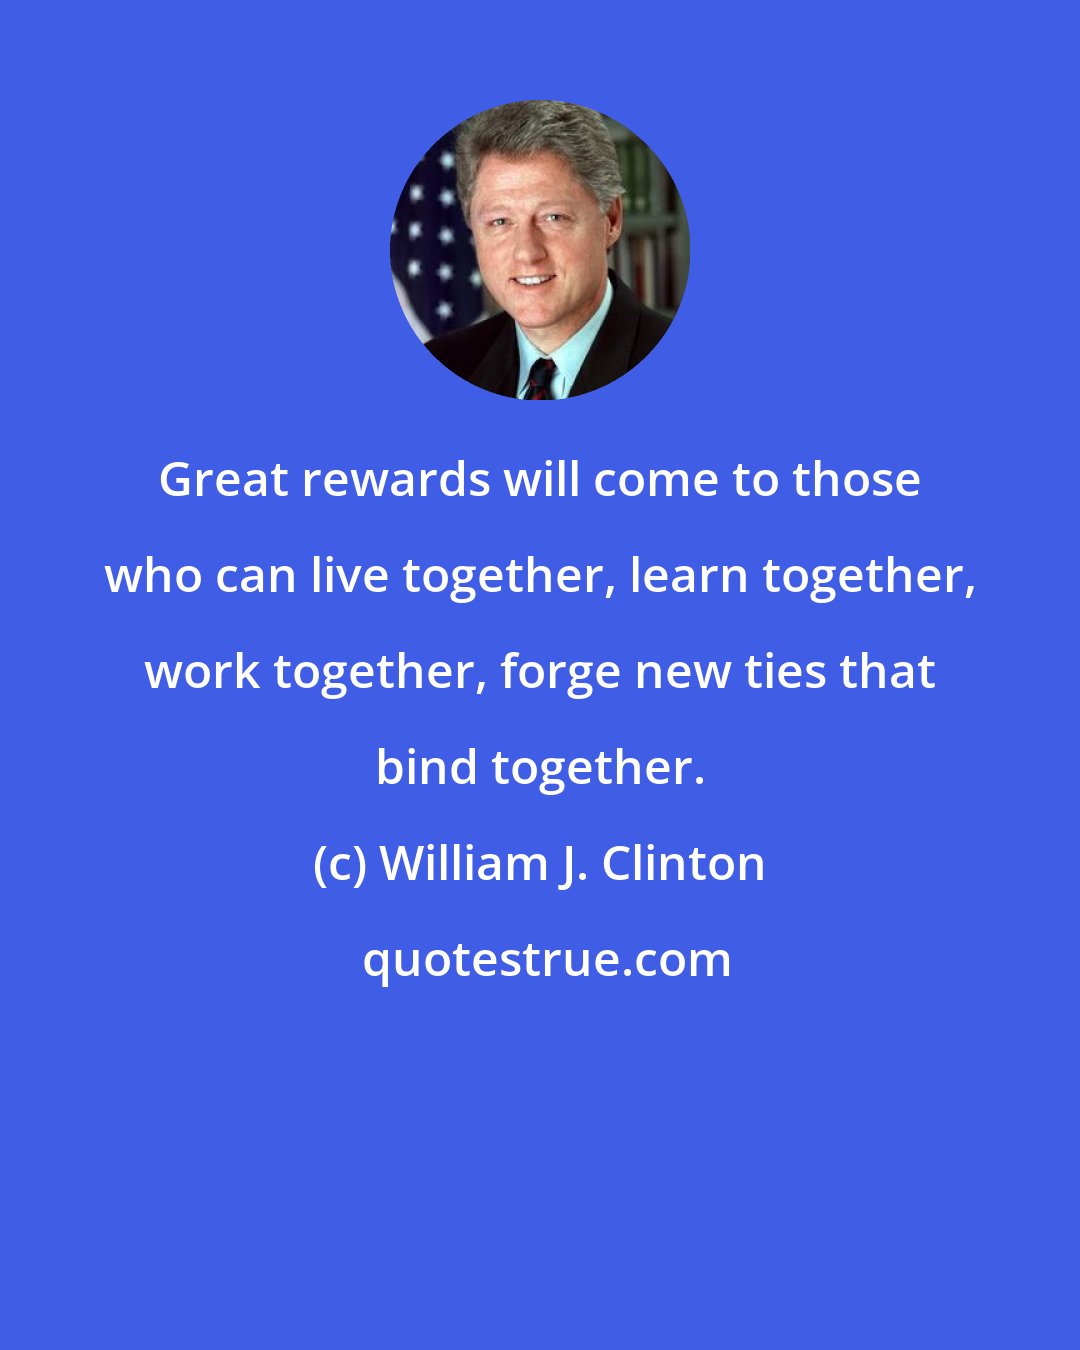 William J. Clinton: Great rewards will come to those who can live together, learn together, work together, forge new ties that bind together.